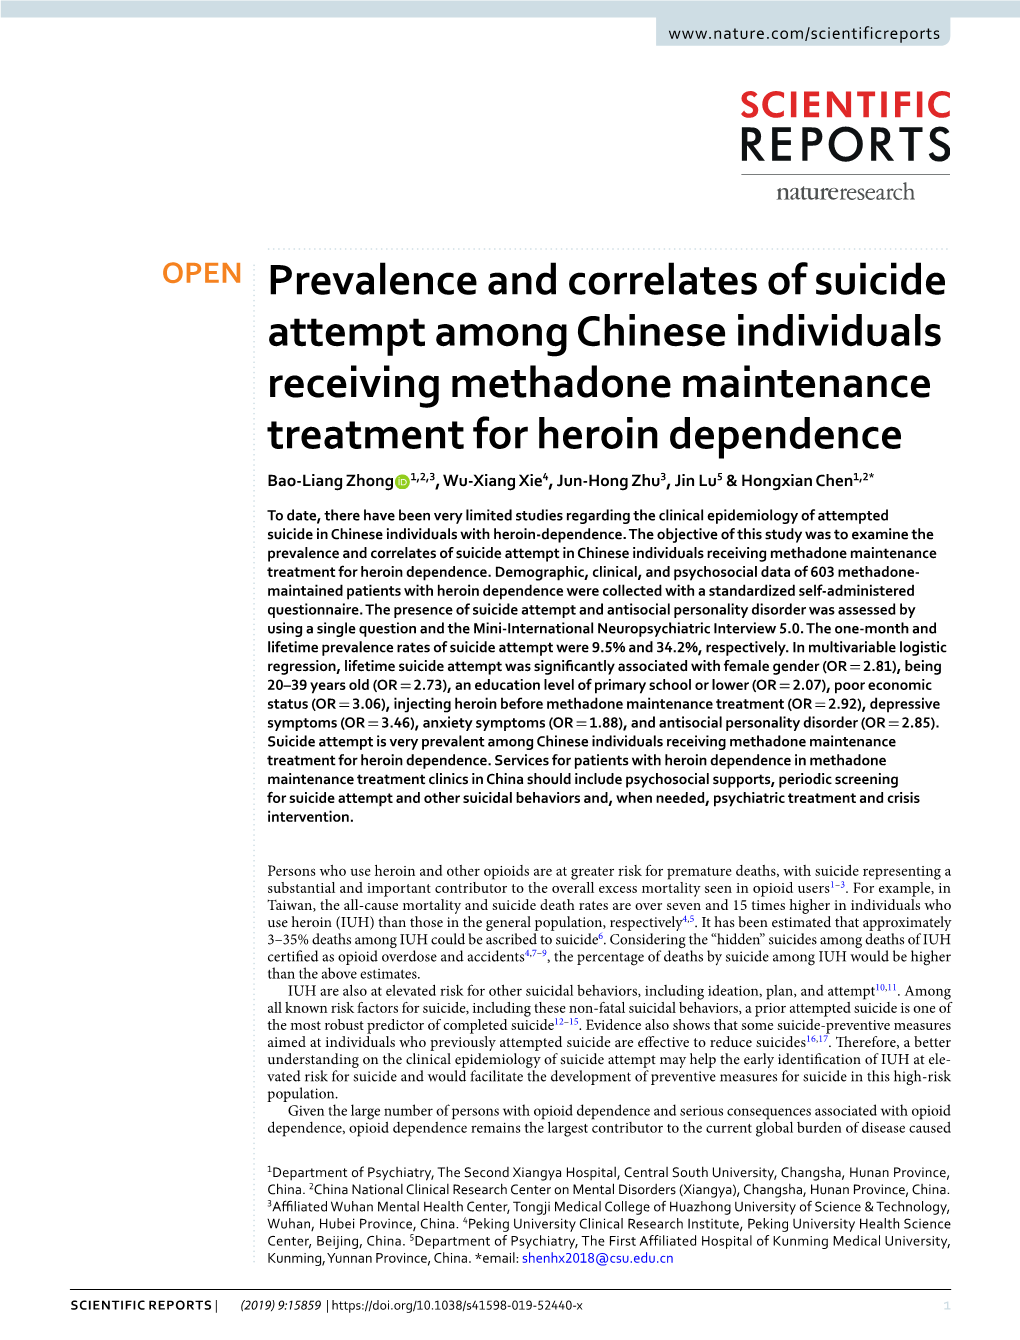 Prevalence and Correlates of Suicide Attempt Among Chinese Individuals